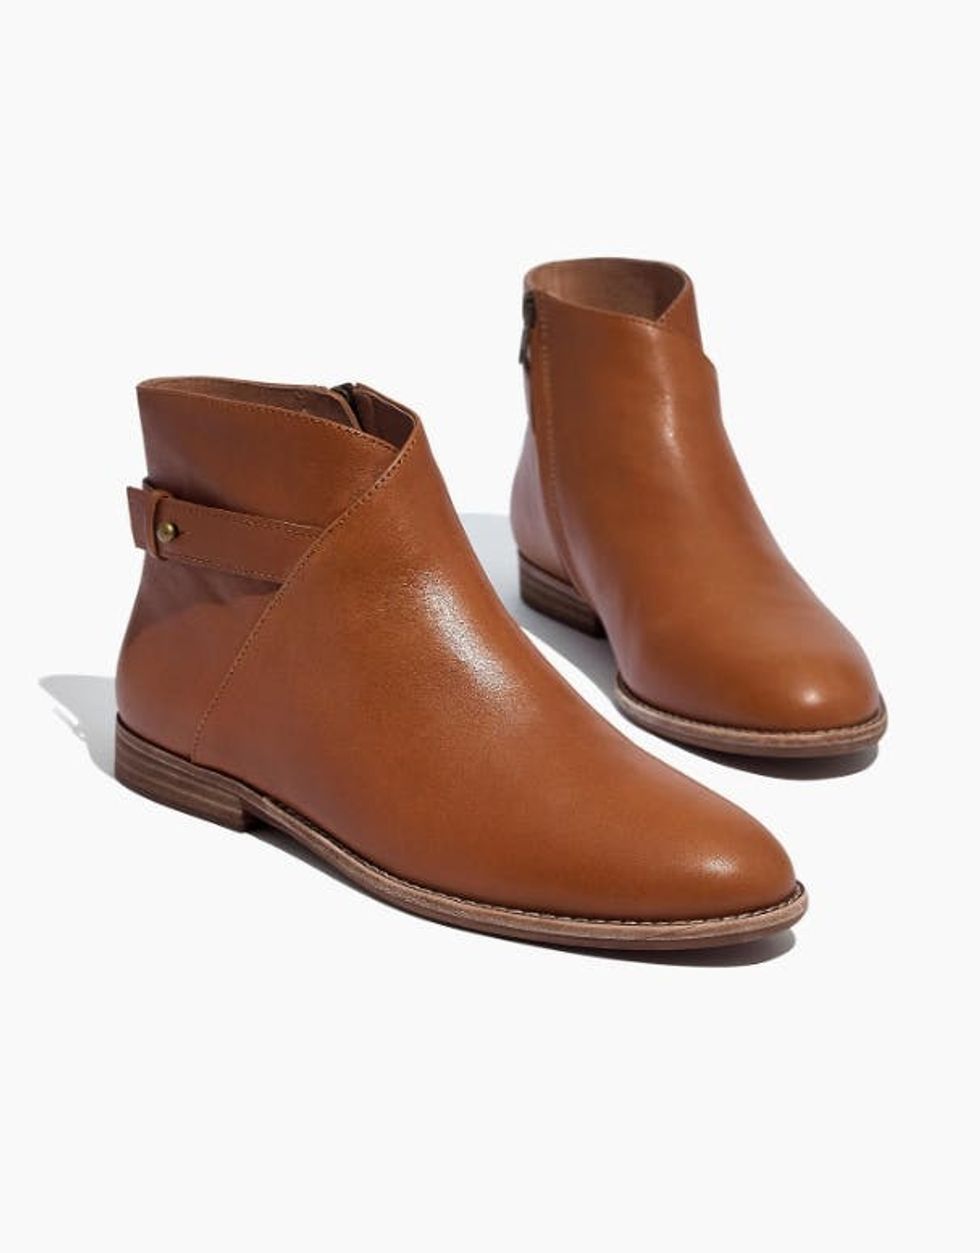 Found The 16 Best Boots For Fall At Every Price Point Brit + Co